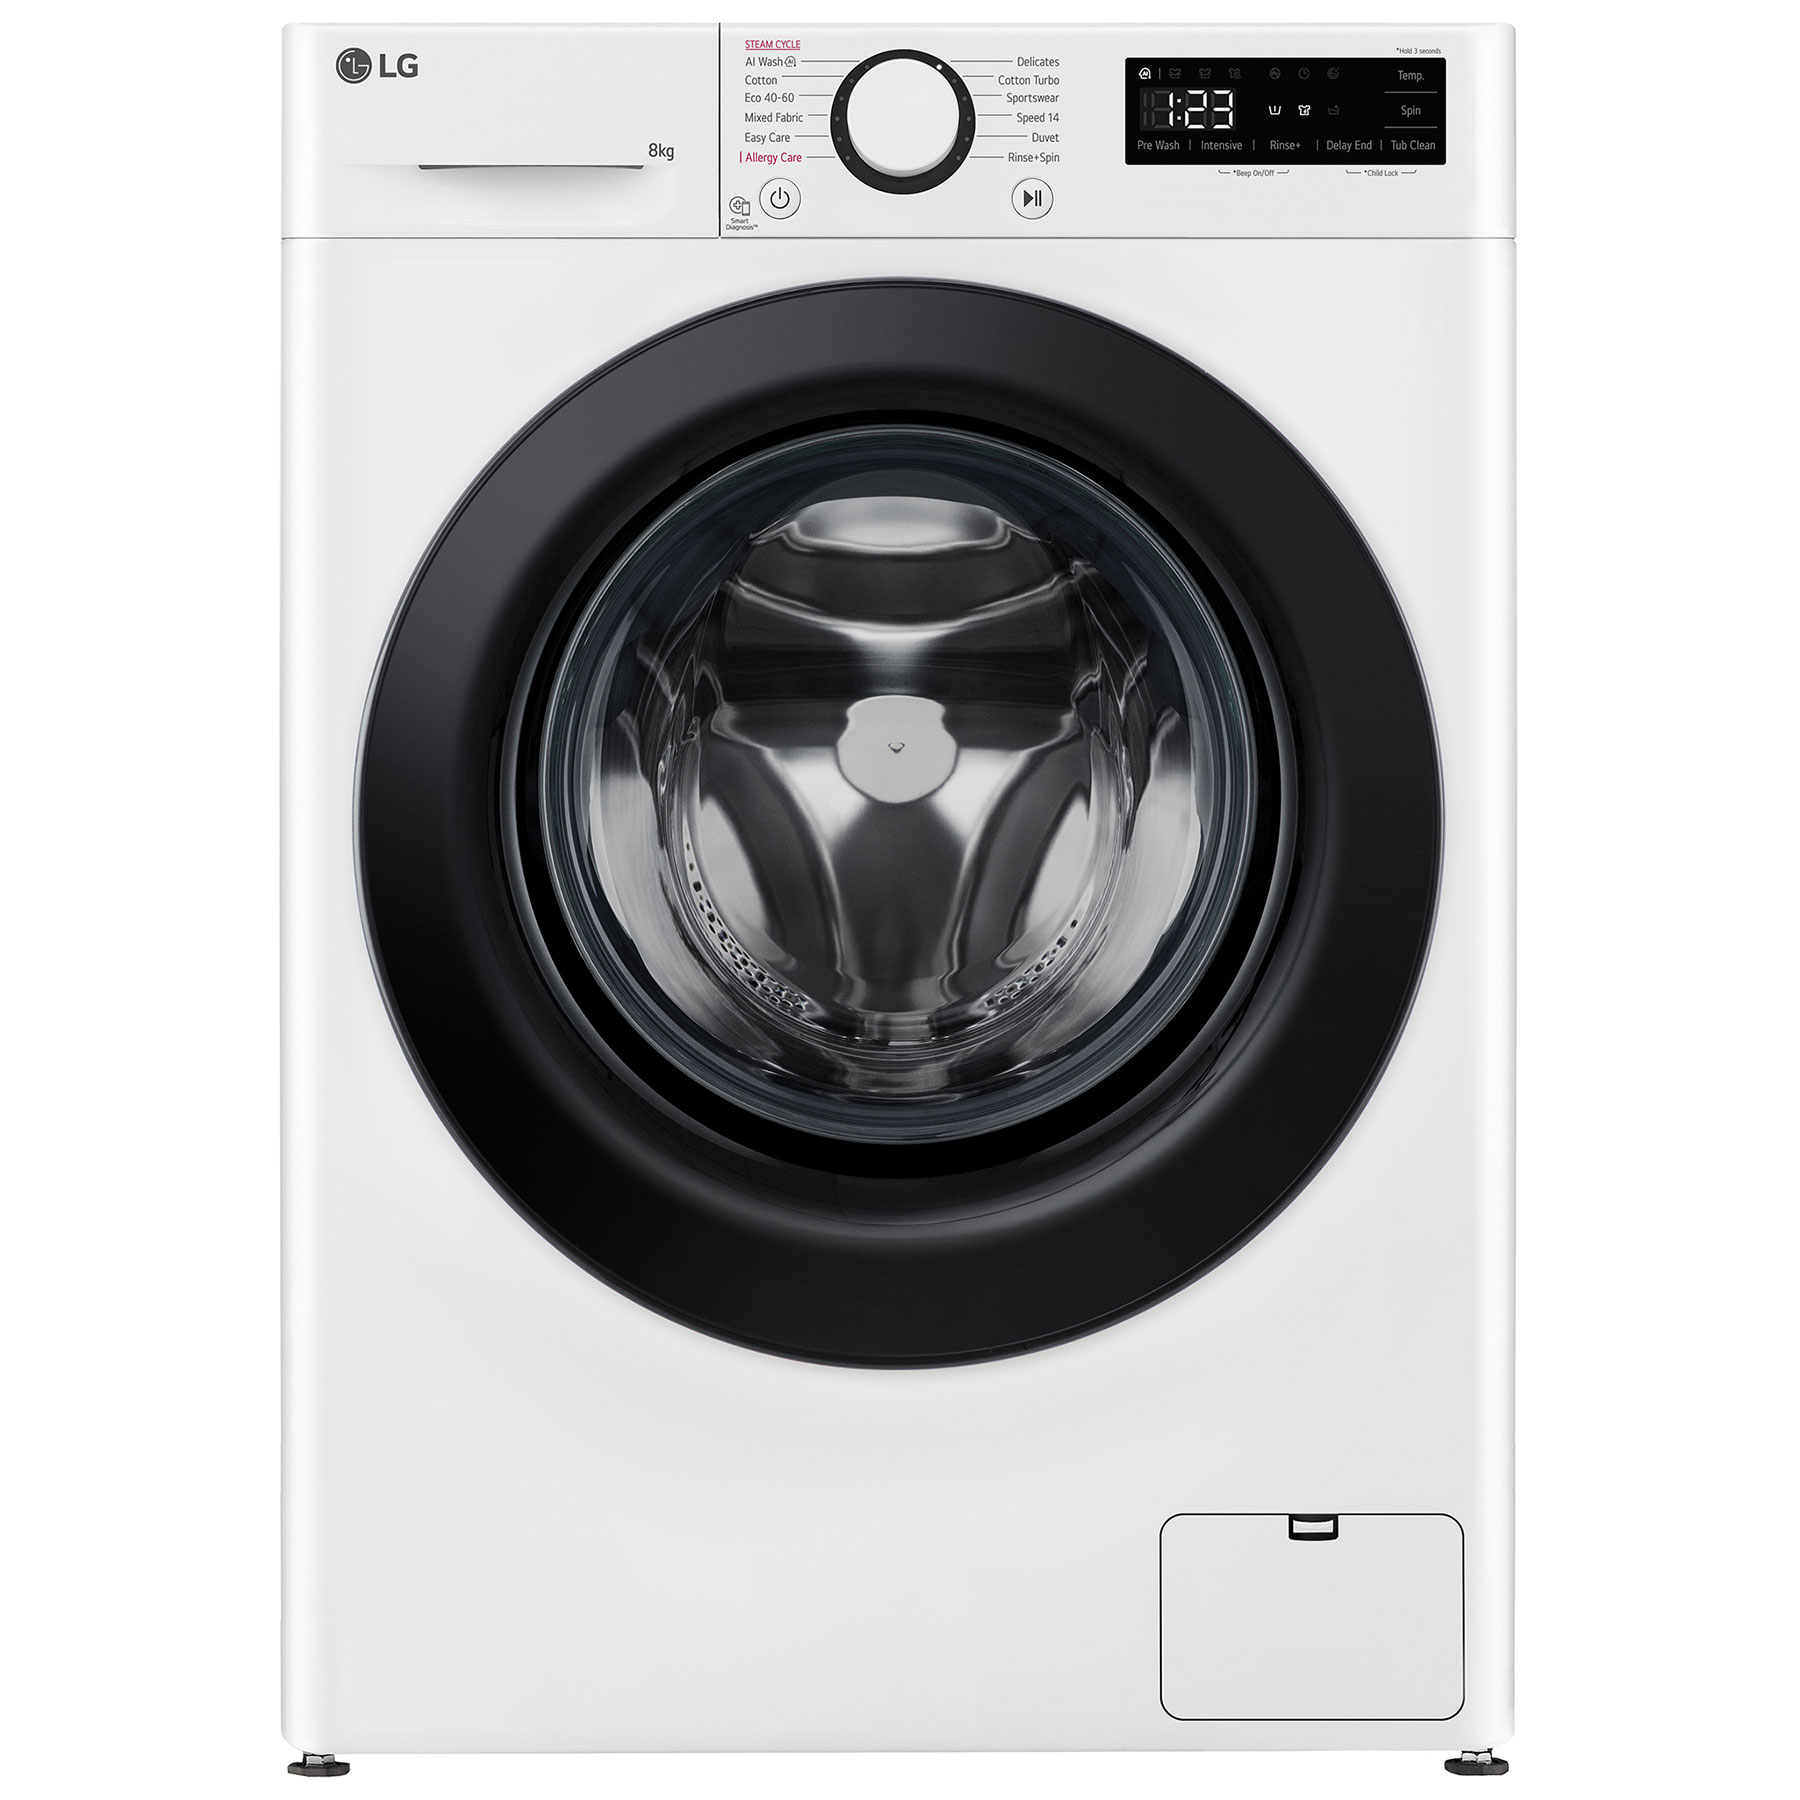 Image of LG F2Y508WBLN1 Washing Machine in White 1200rpm 8kg A Rated